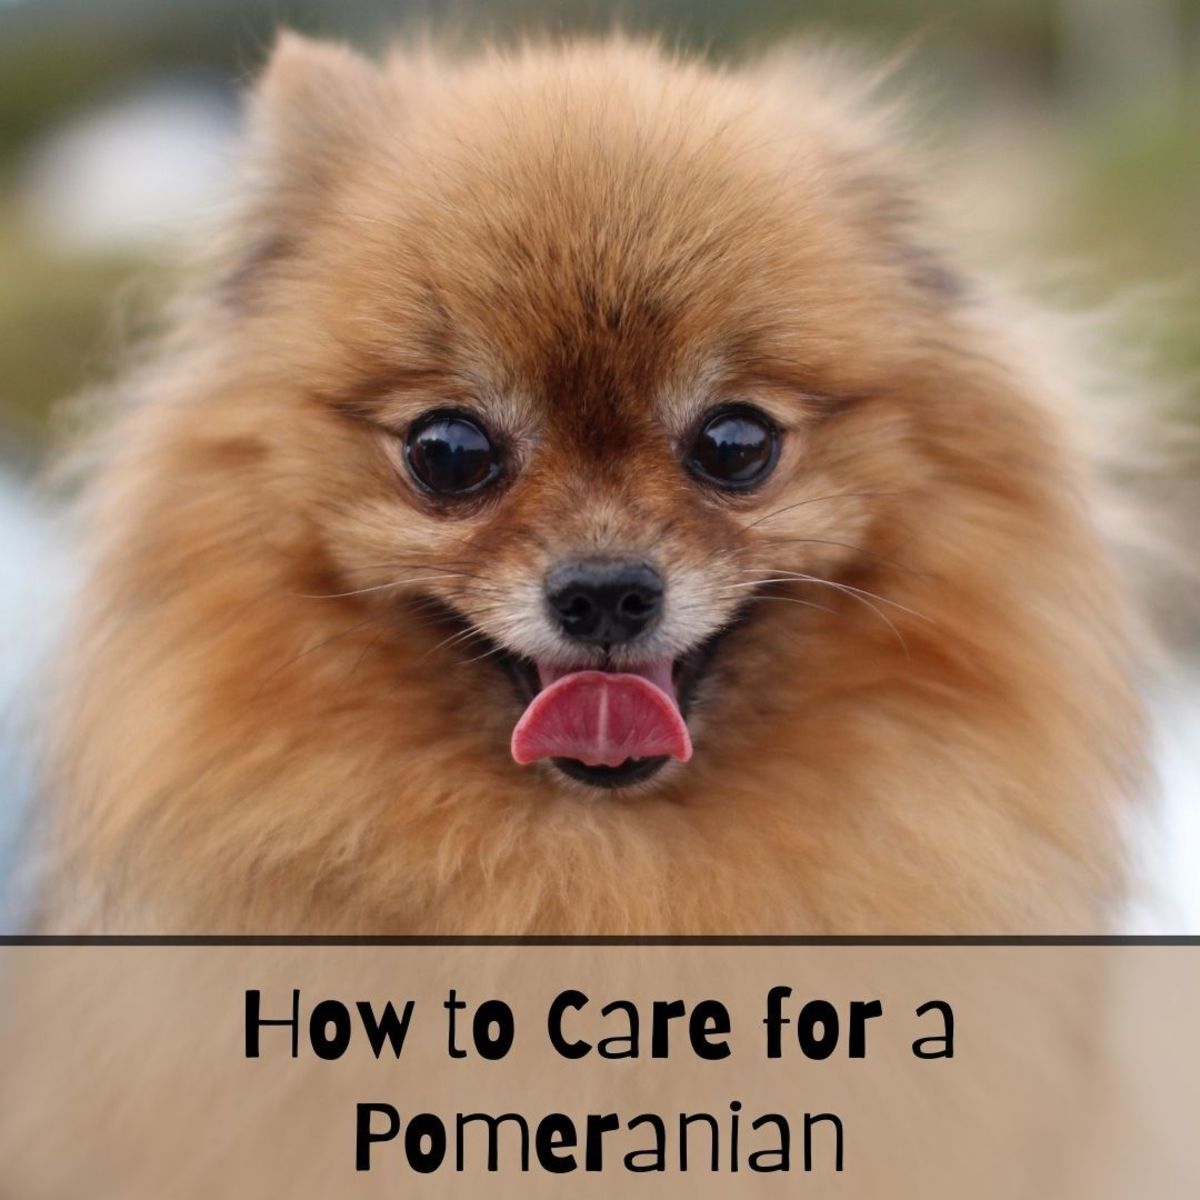 A How-to Guide for Caring for a Pomeranian